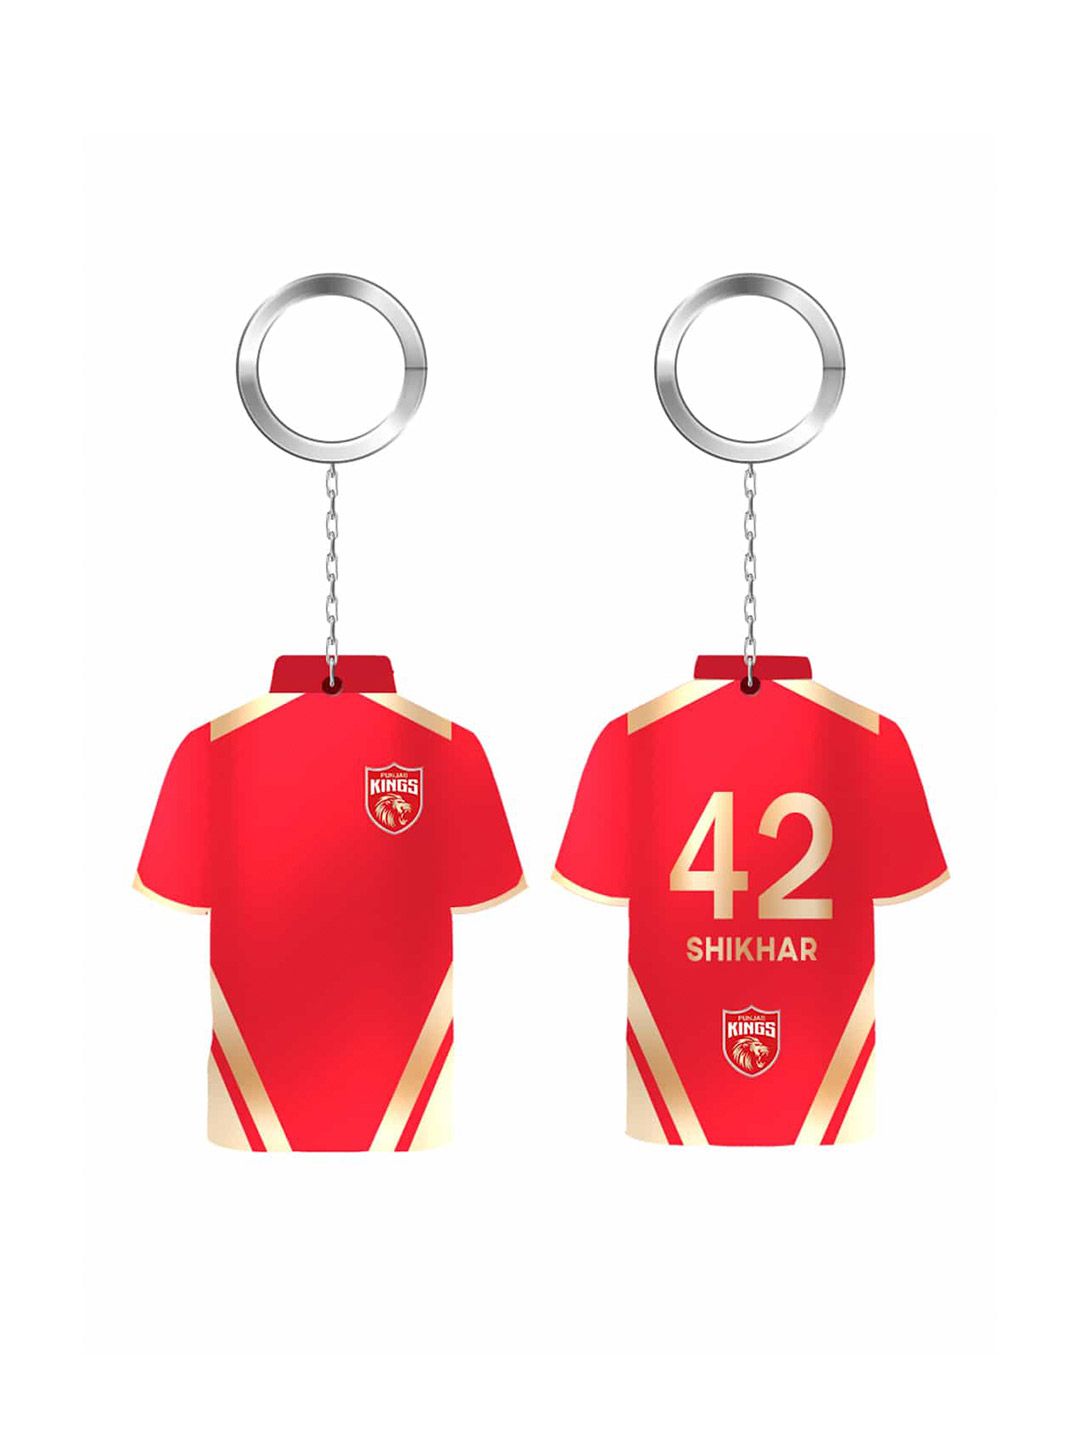 Buy Punjab Kings Gear Up - Acrylic Keychains from Fancode Shop